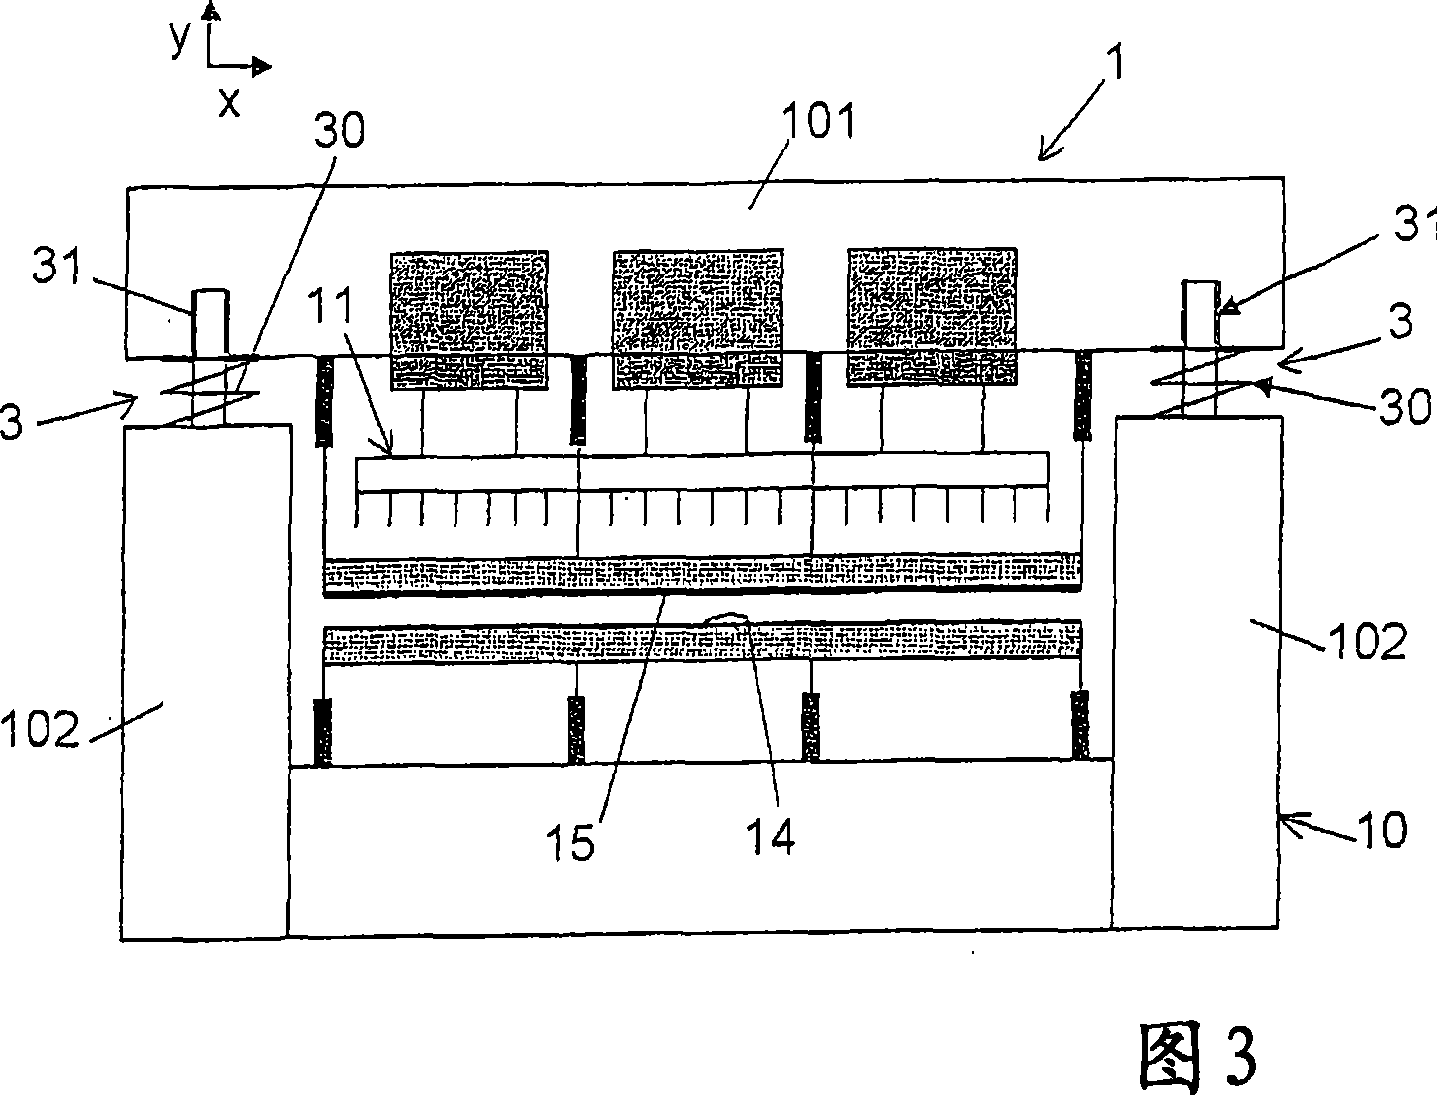 Needle loom in which the frequency of at least one of its vibration modes can be adjusted